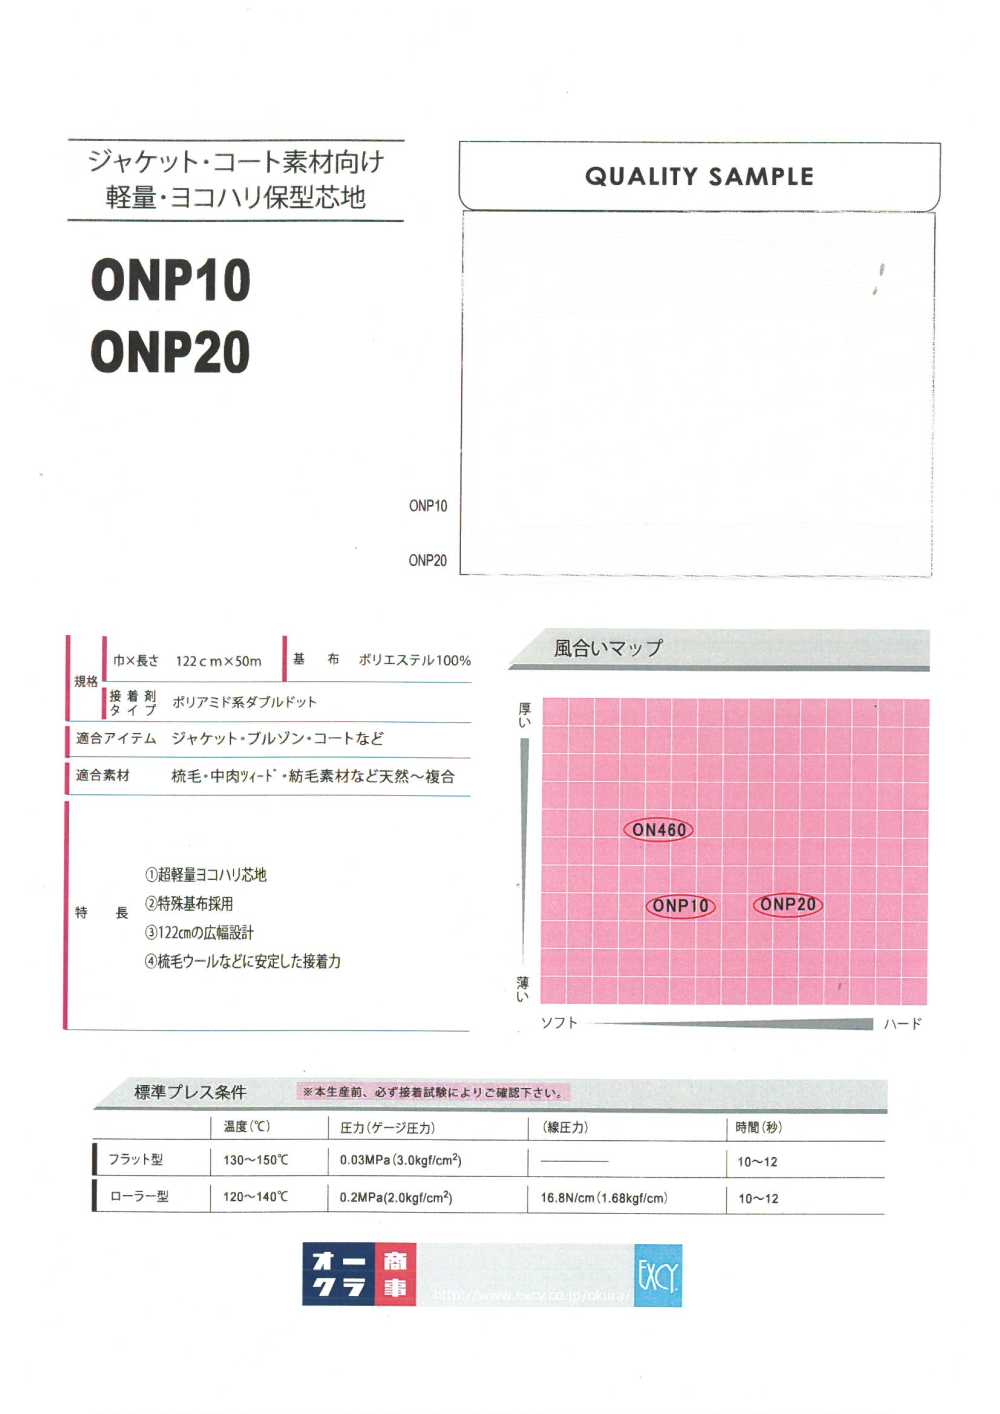 ONP10 Light-weight, Horizontal, Shape-retaining Interlining For Jackets And Coats 20D×75D*30D Nittobo